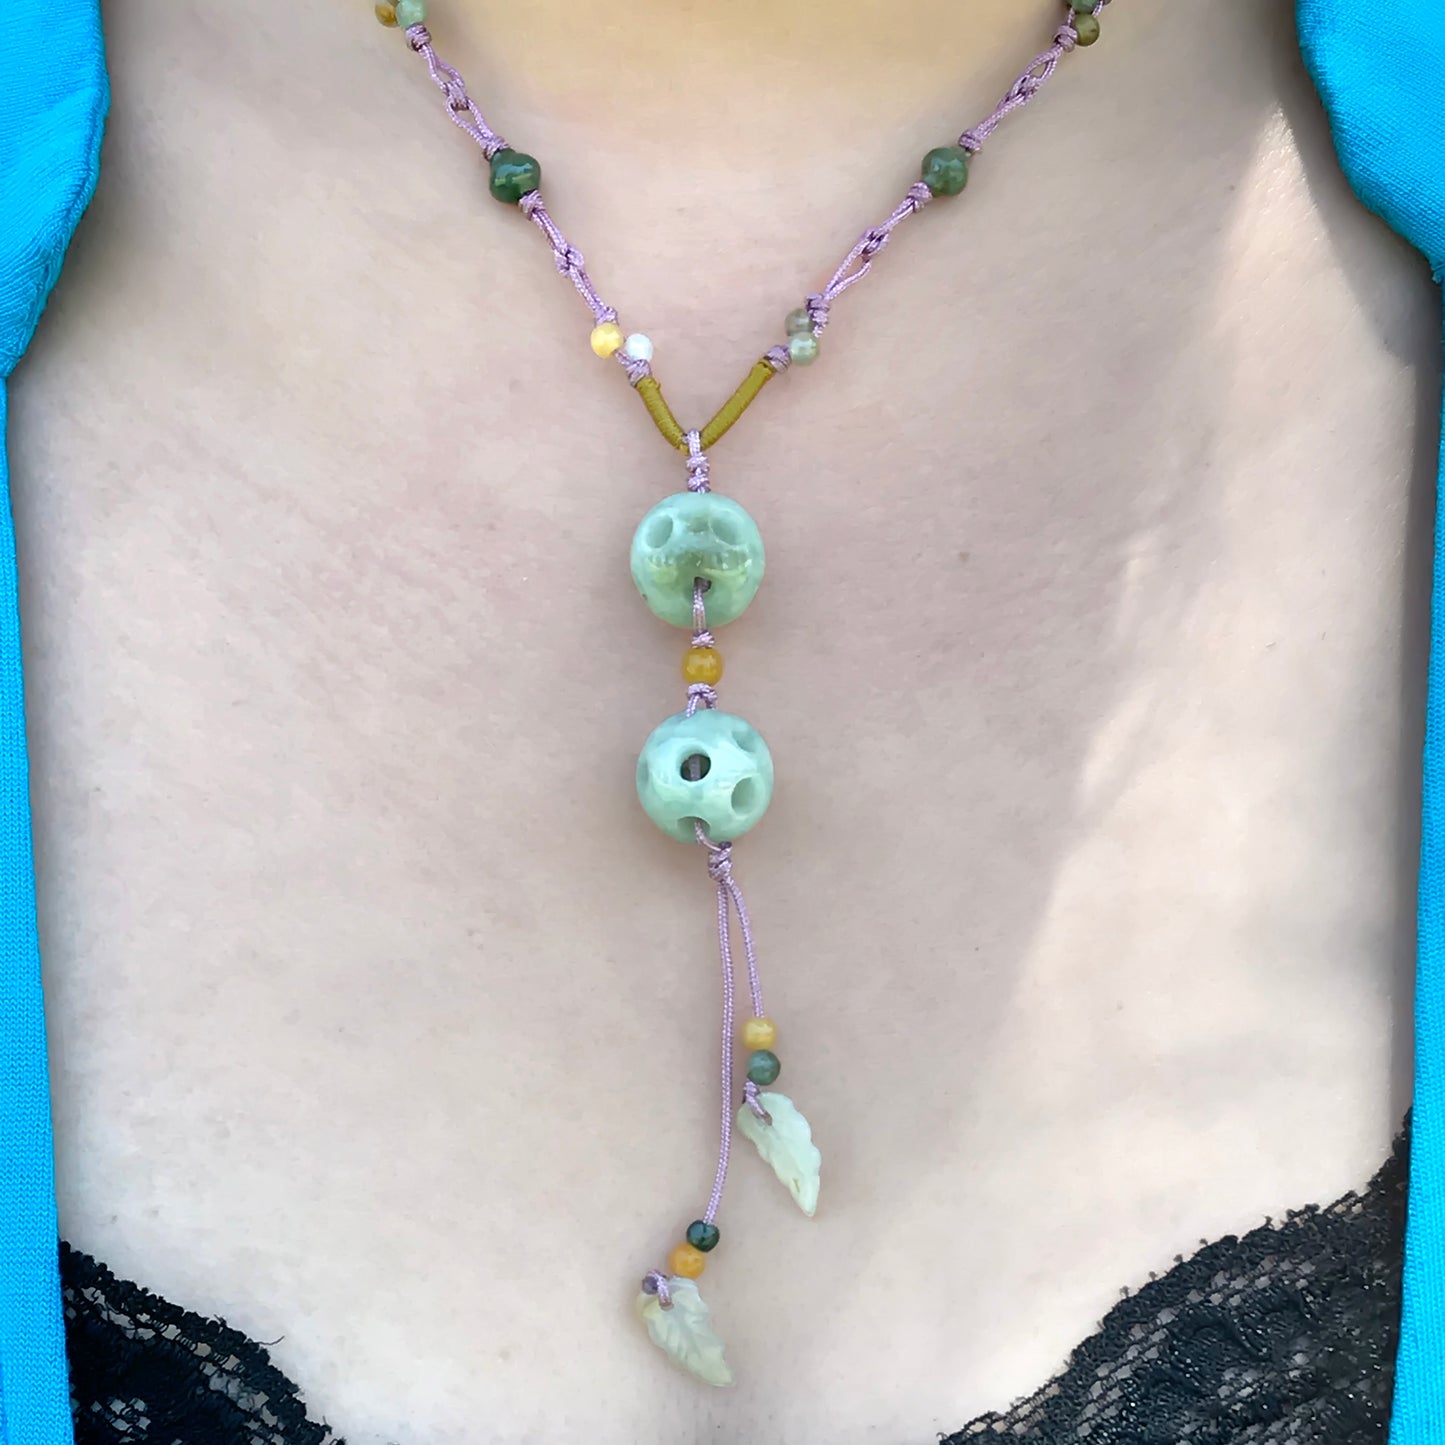 Look Fabulous with Jade Beads Handmade Necklace